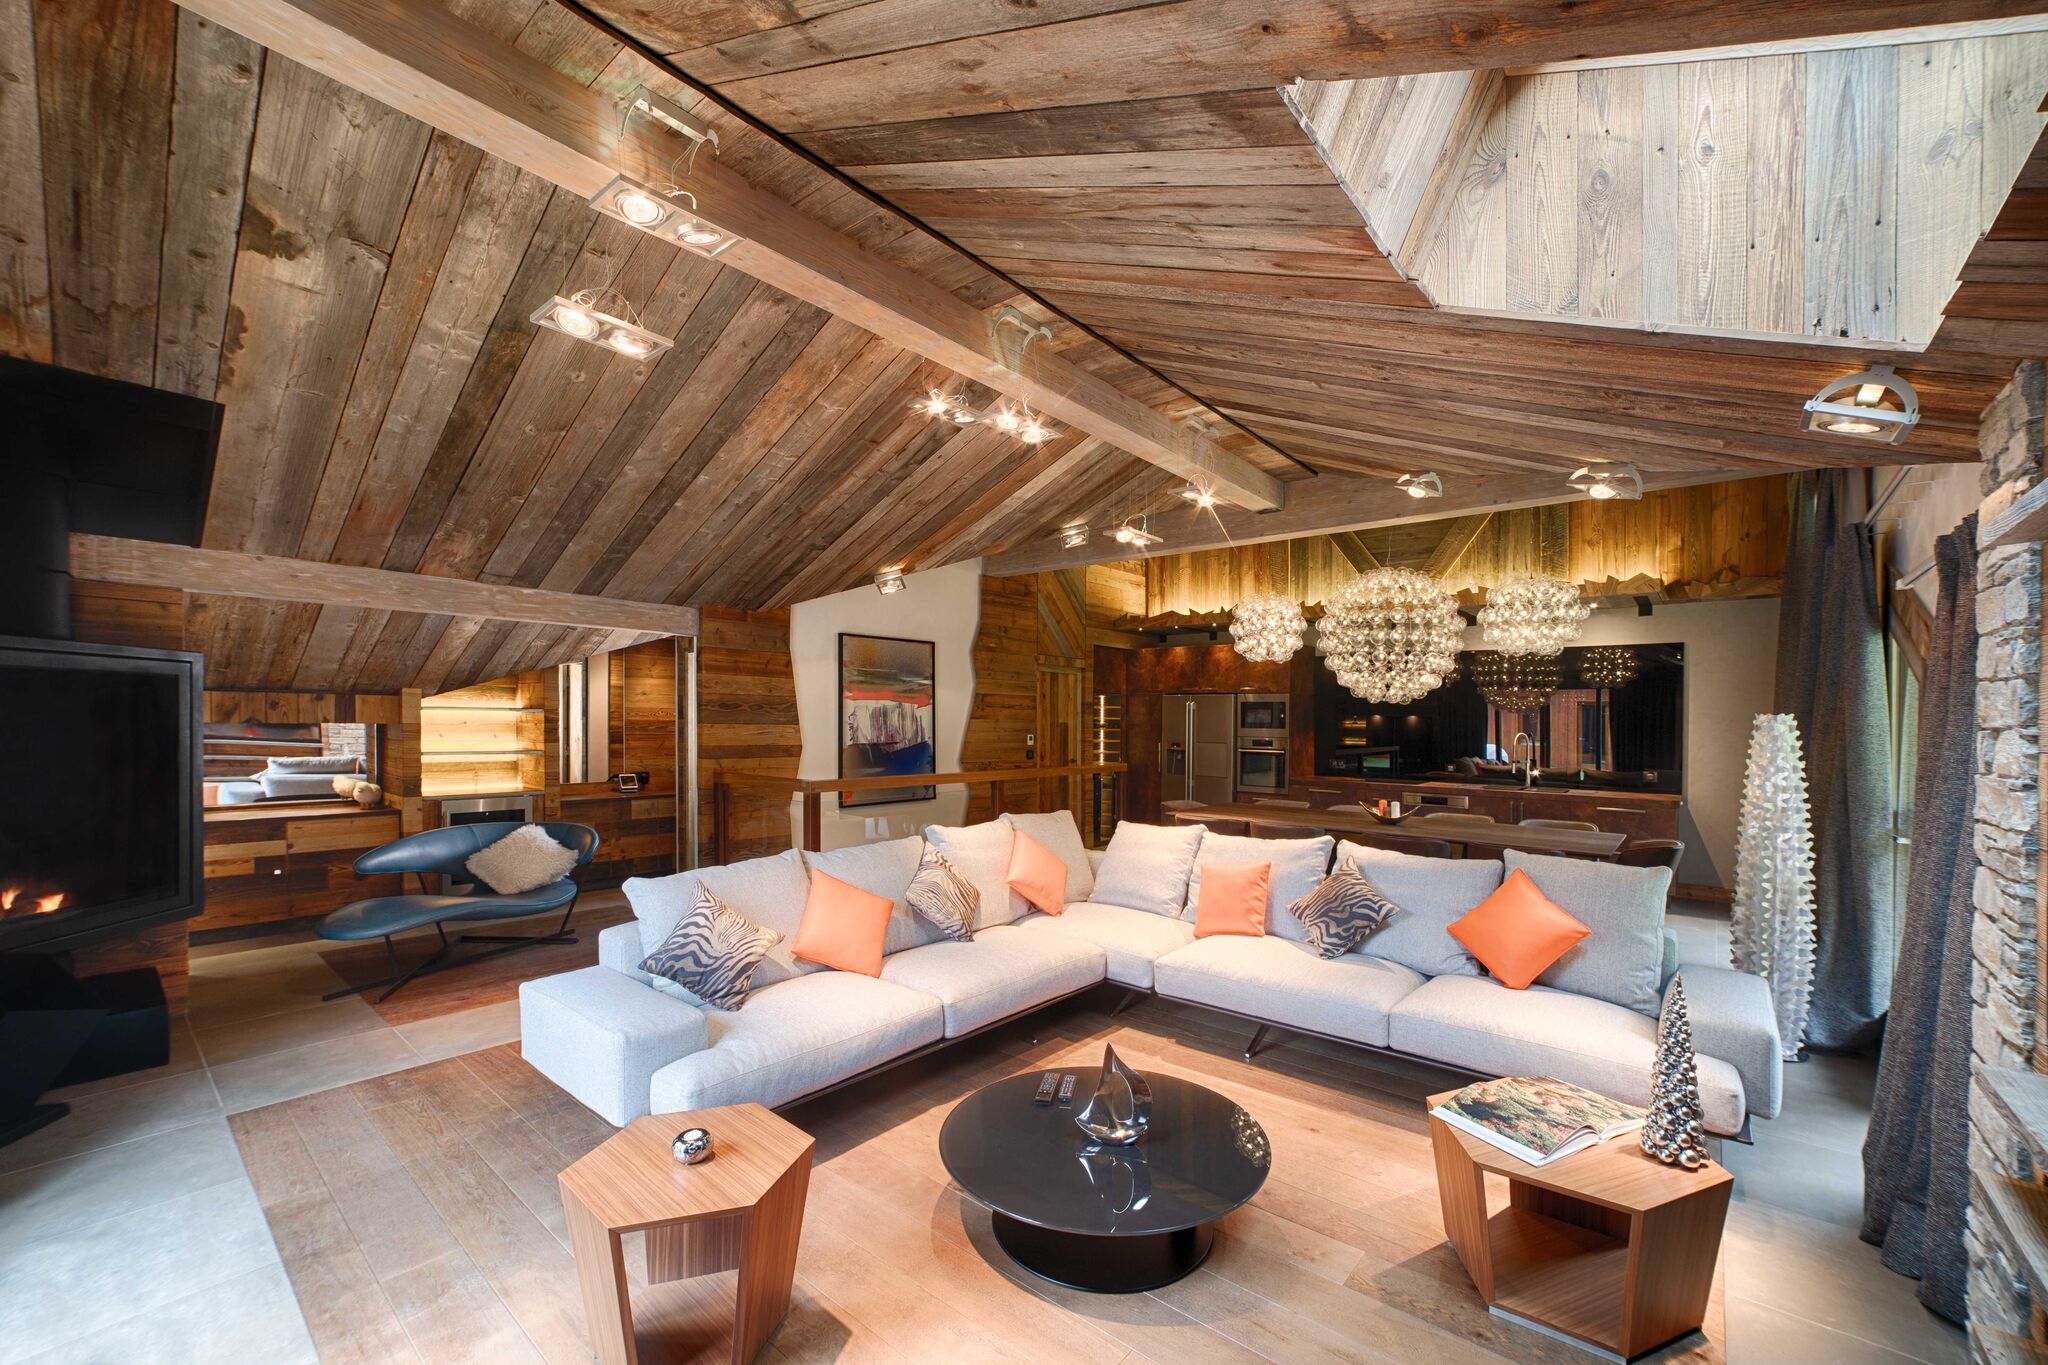 Luxury chalet with swimming pool and jacuzzi, in the heart of the mountains